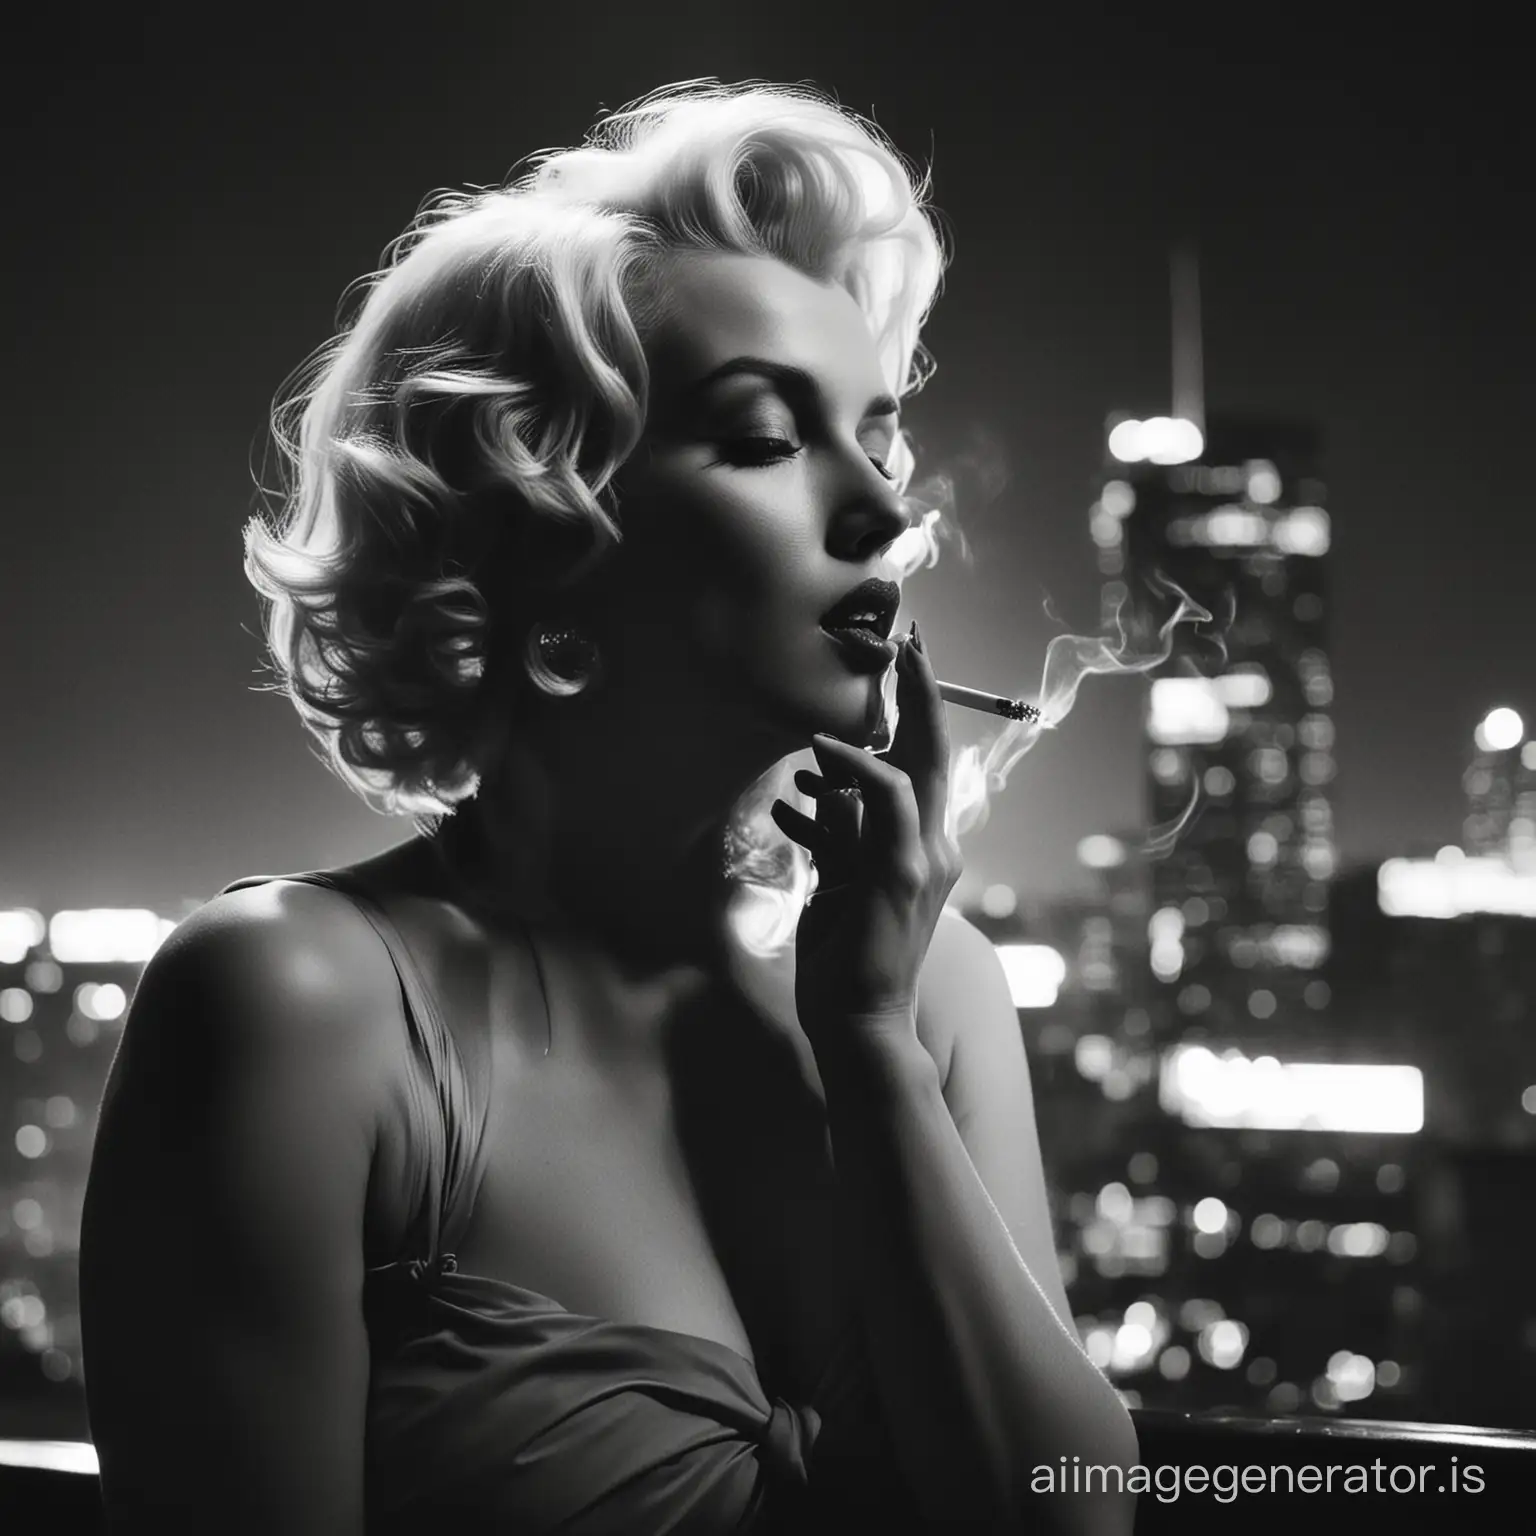 Marilyn-Monroe-Smoking-in-Urban-Noir-Setting-with-City-Lights-at-Night